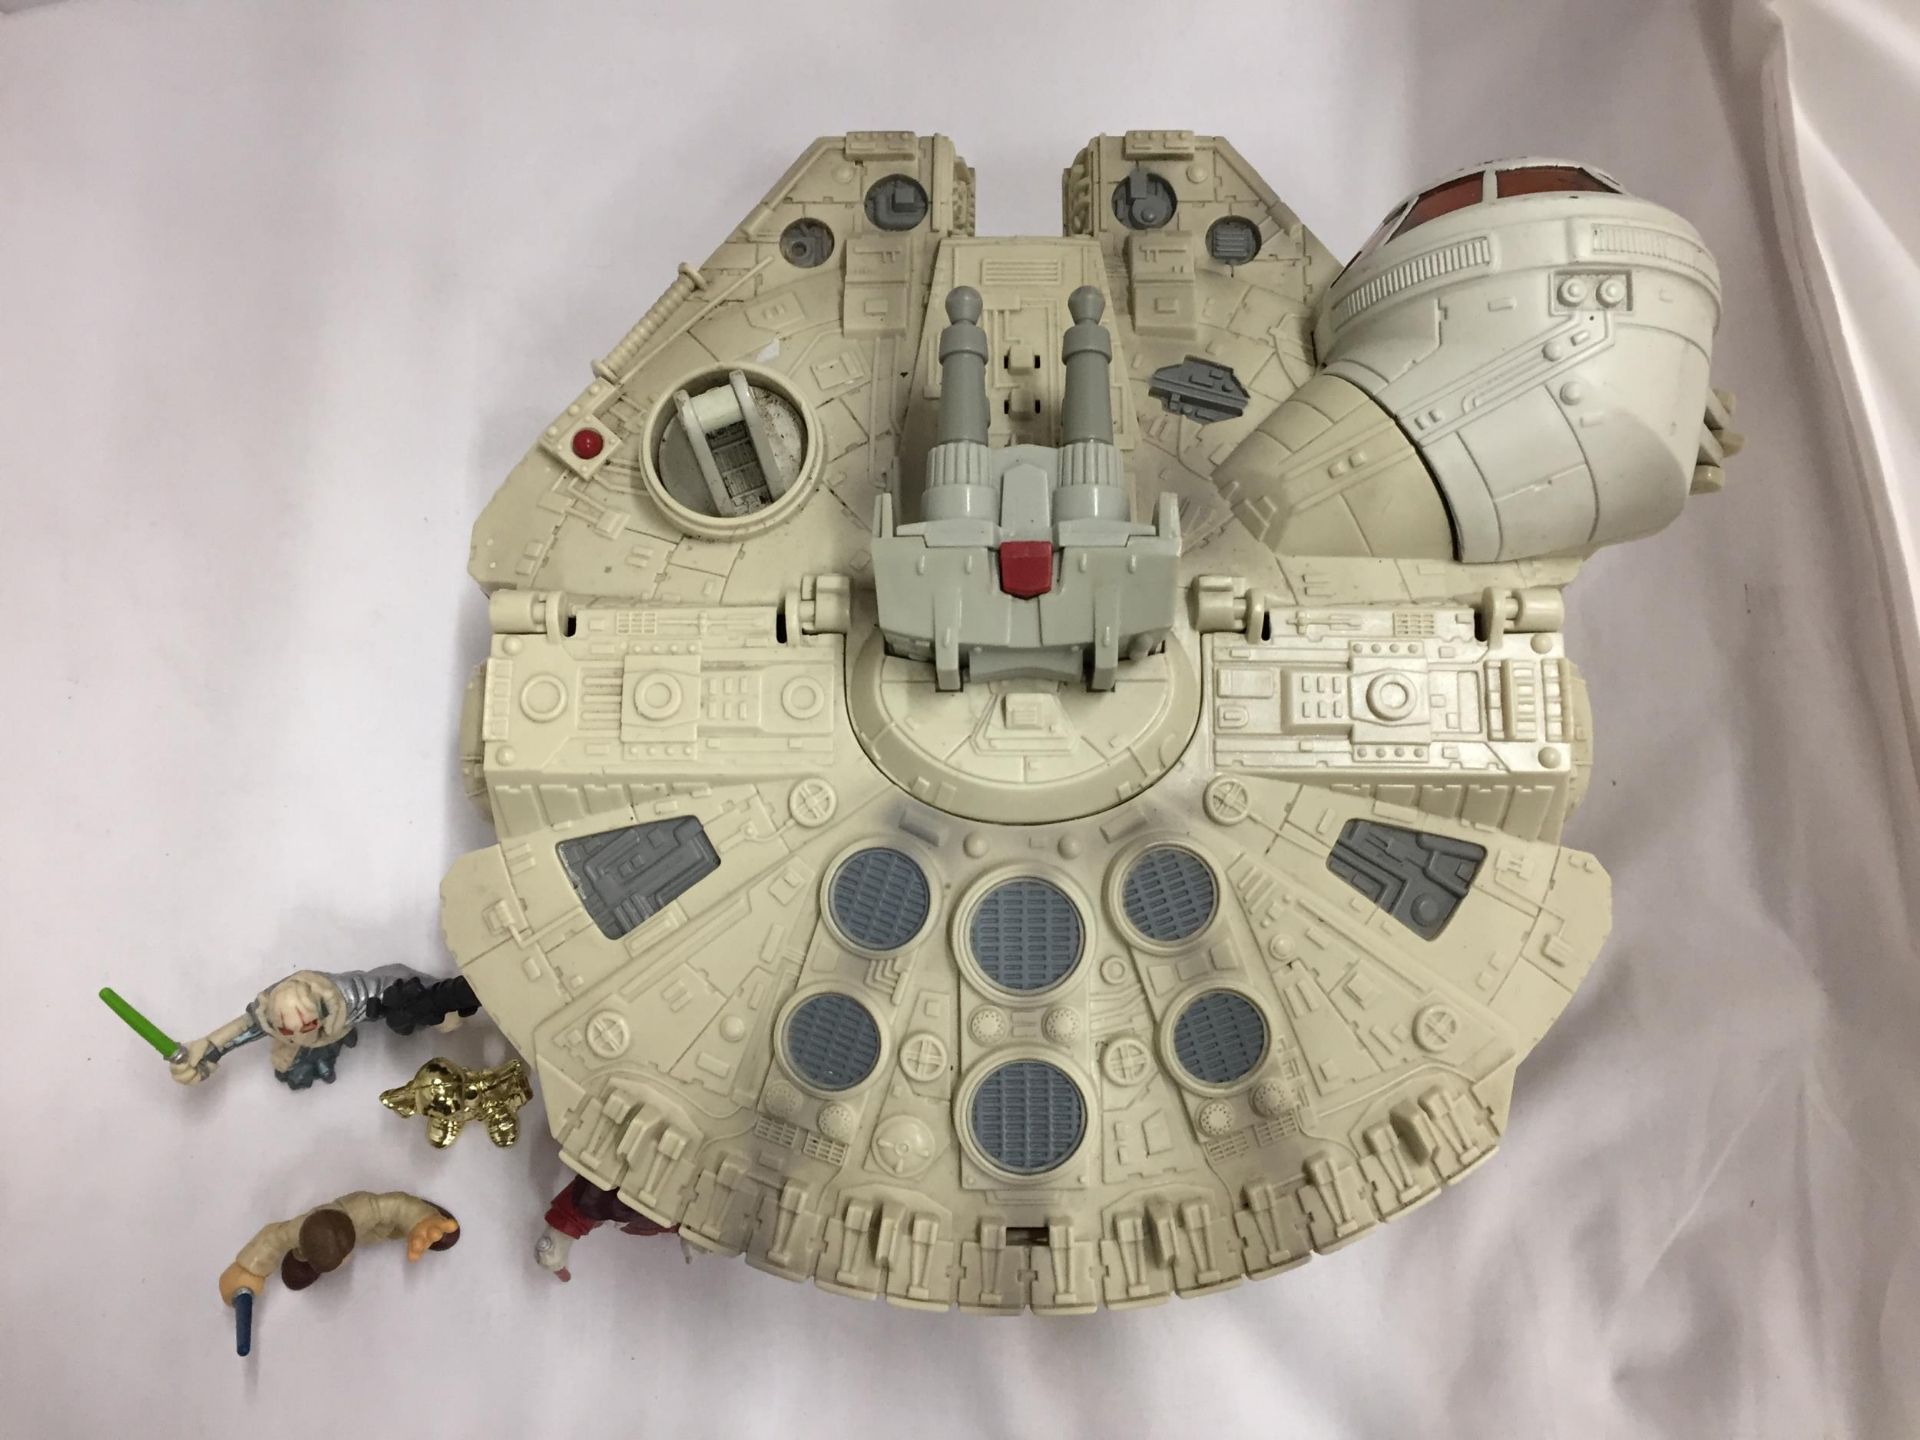 A STAR WARS MILLENIUM FALCON SPACE SHIP WITH FOUR FIGURES - Image 3 of 3